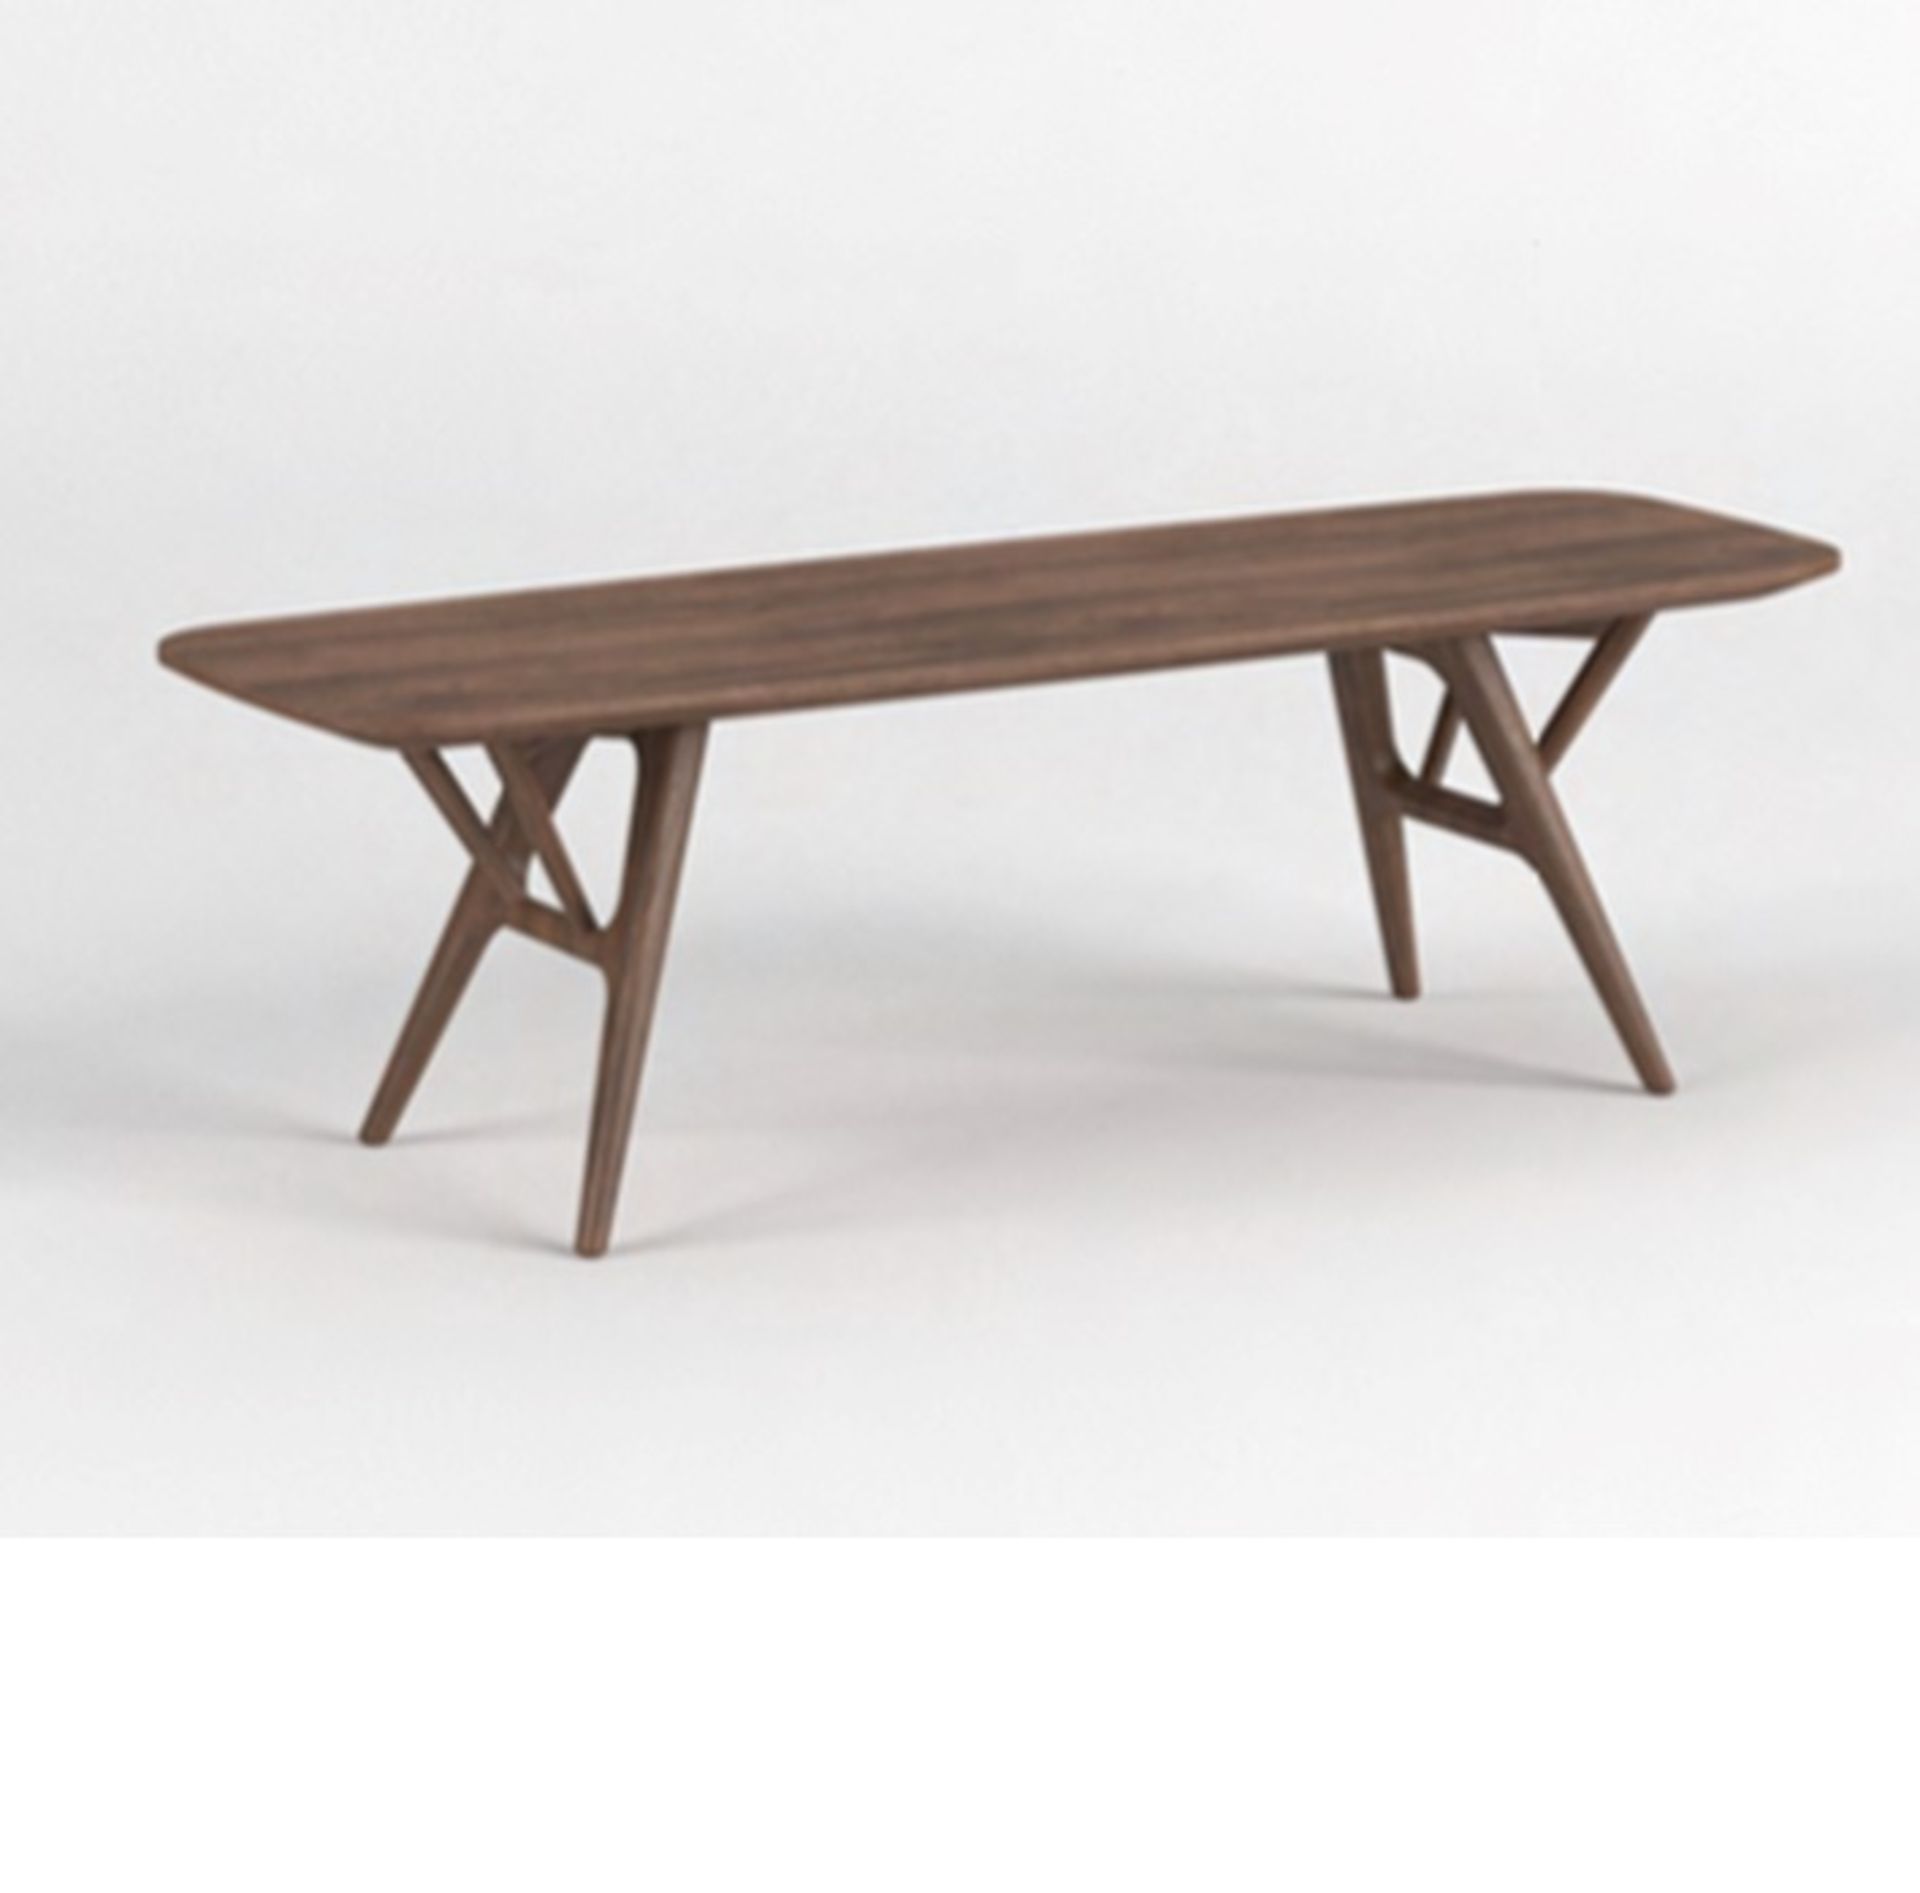 Asher Bench- Crafted From Solid And Veneer Black American Walnut, This Bench Will Fit Well Into A